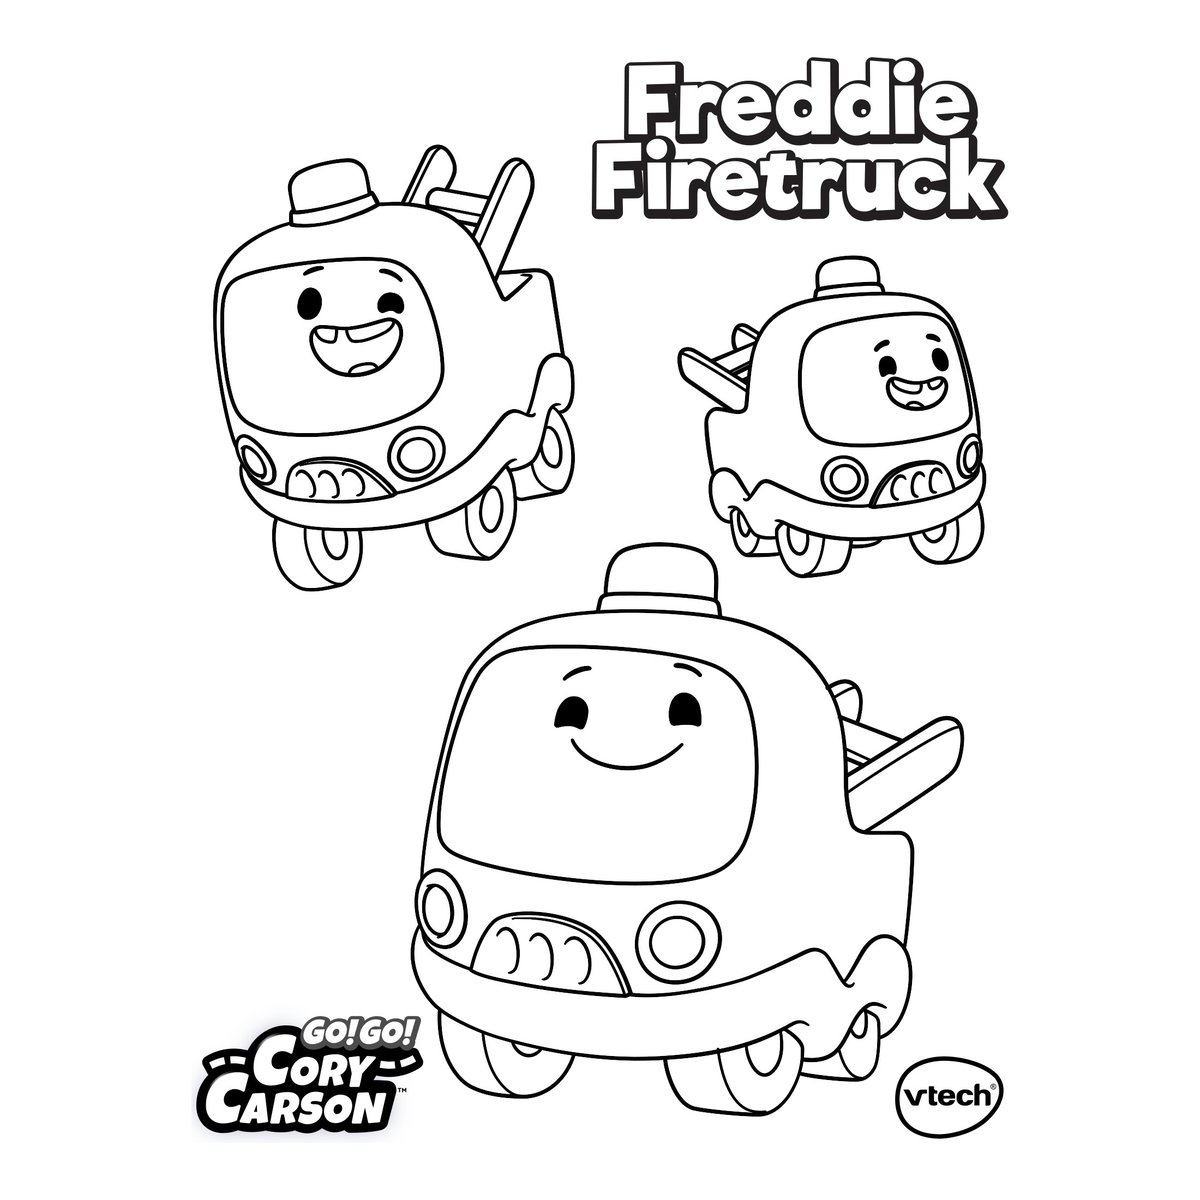 Cory Carson Coloring Pages Pdf to Print - Go Go Cory Carson Freddie Firetruck Coloring Pages